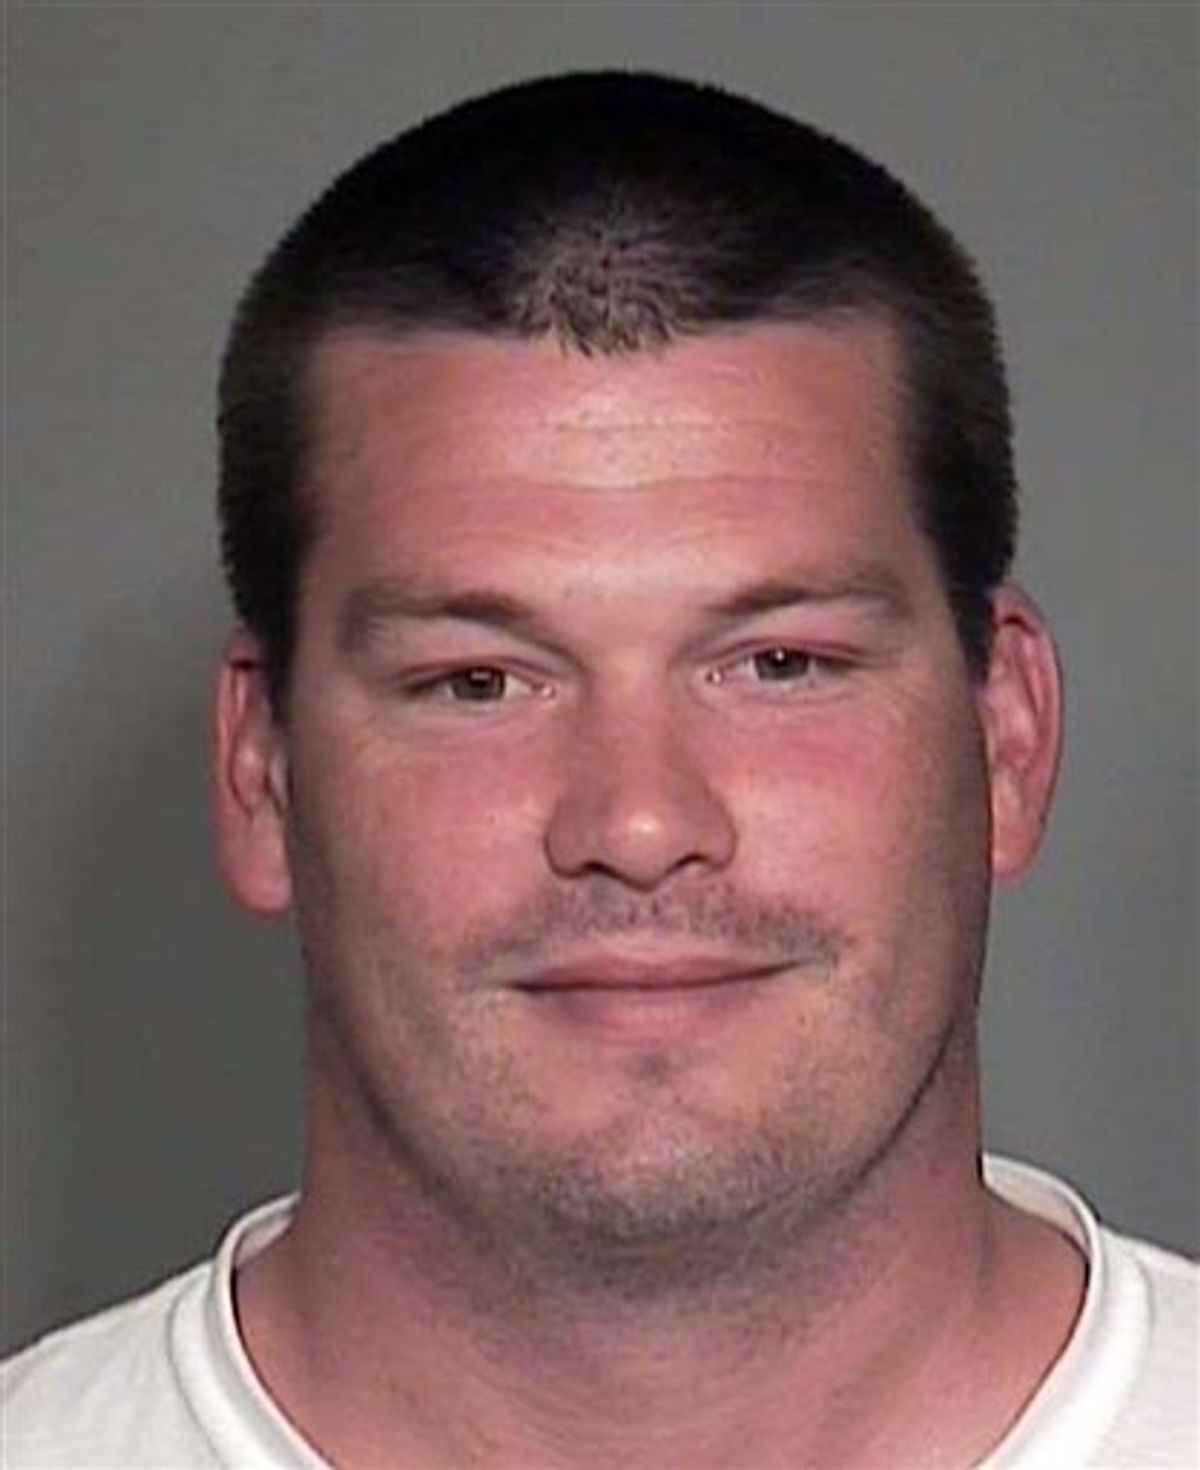 This undated photo provided by the National Sex Offender Public web site shows John Albert Gardner.  Authorities and volunteers are widening a search for a 17-year-old missing in San Diego County after Gardner was arrested in connection with her disappearance. (AP Photo/National Sex Offender Public web site) (AP)